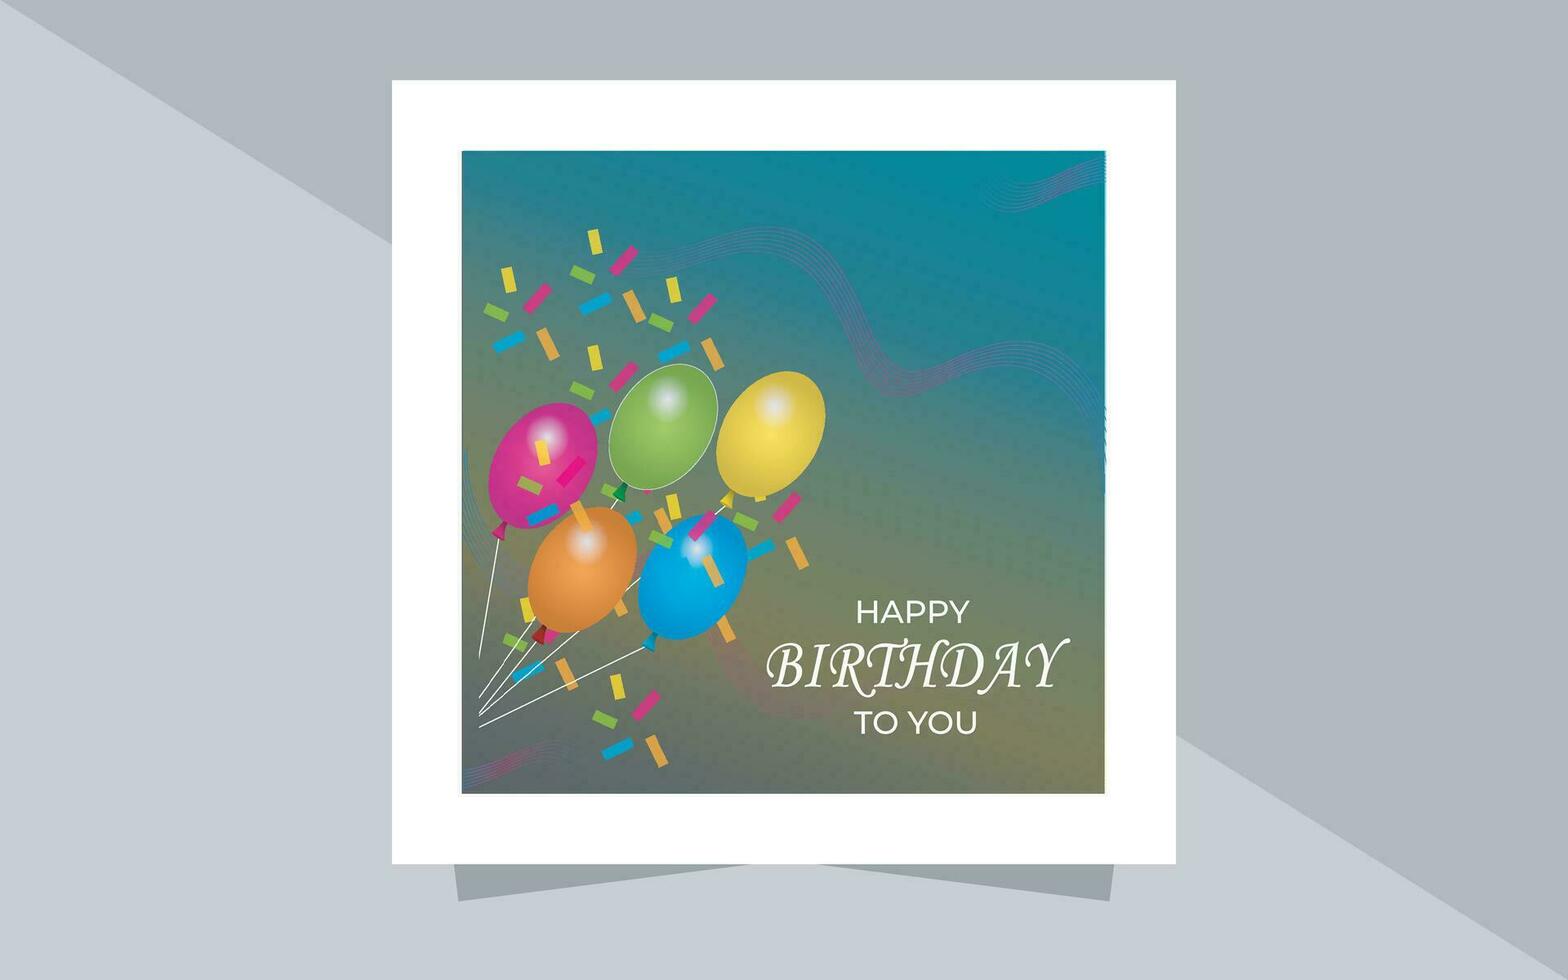 Happy birthday celebration background with realistic balloons vector